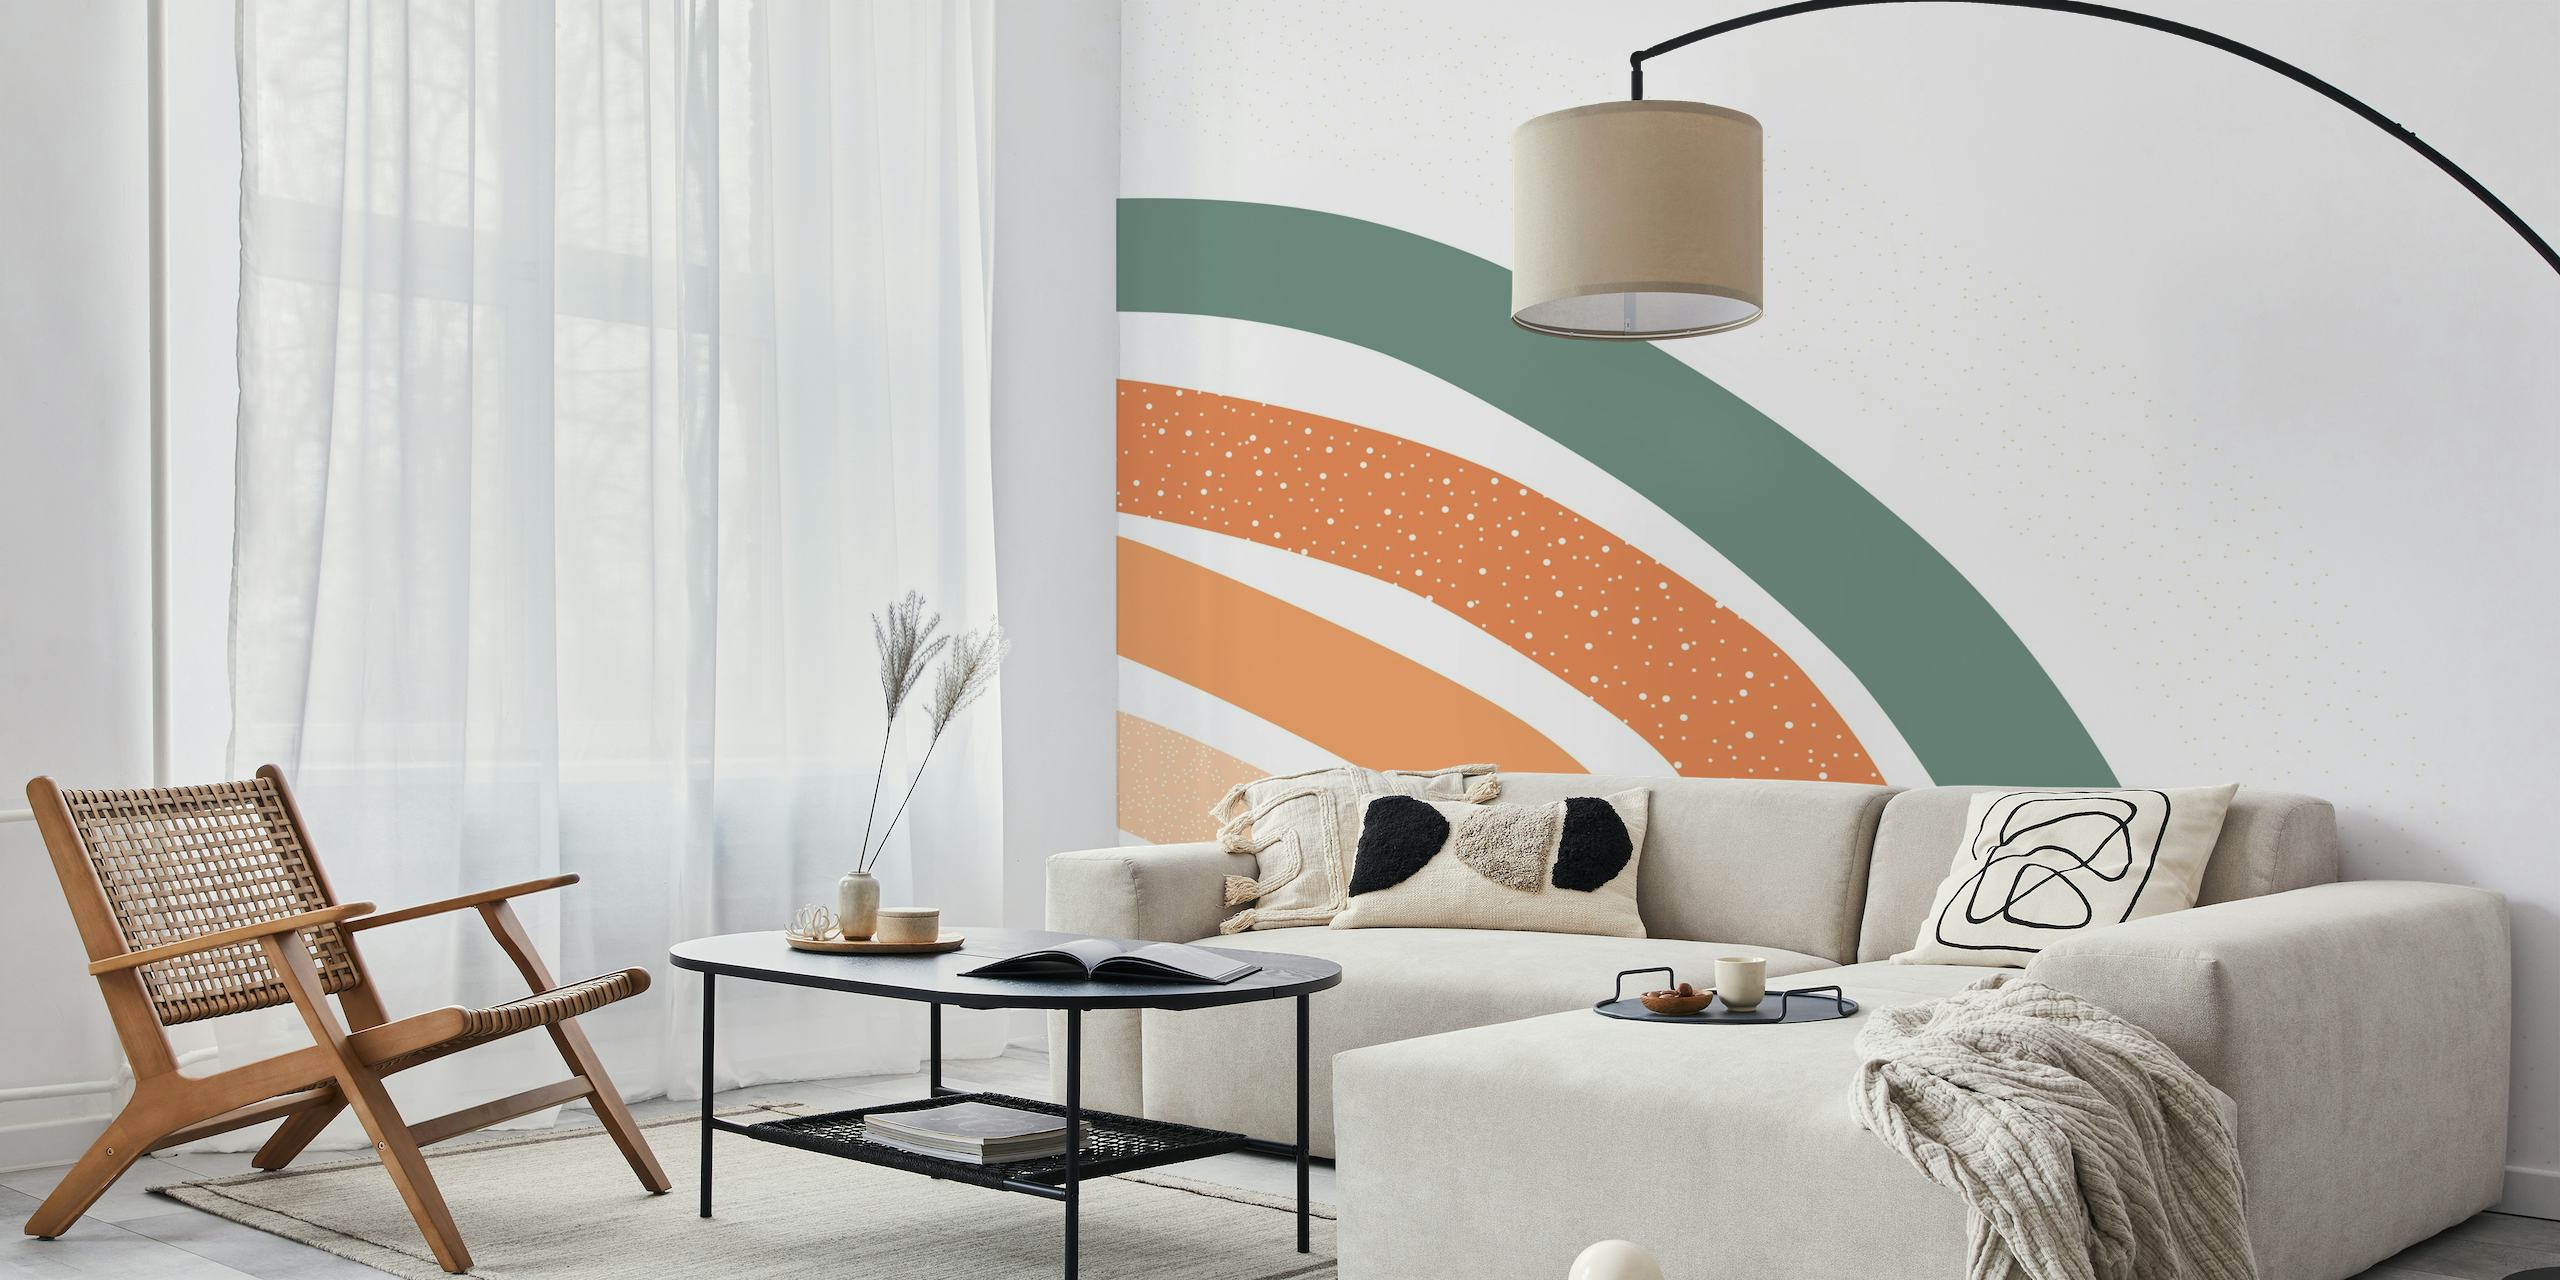 Abstract wall mural with arches in blush, terracotta, and teal with a textured speckle detail